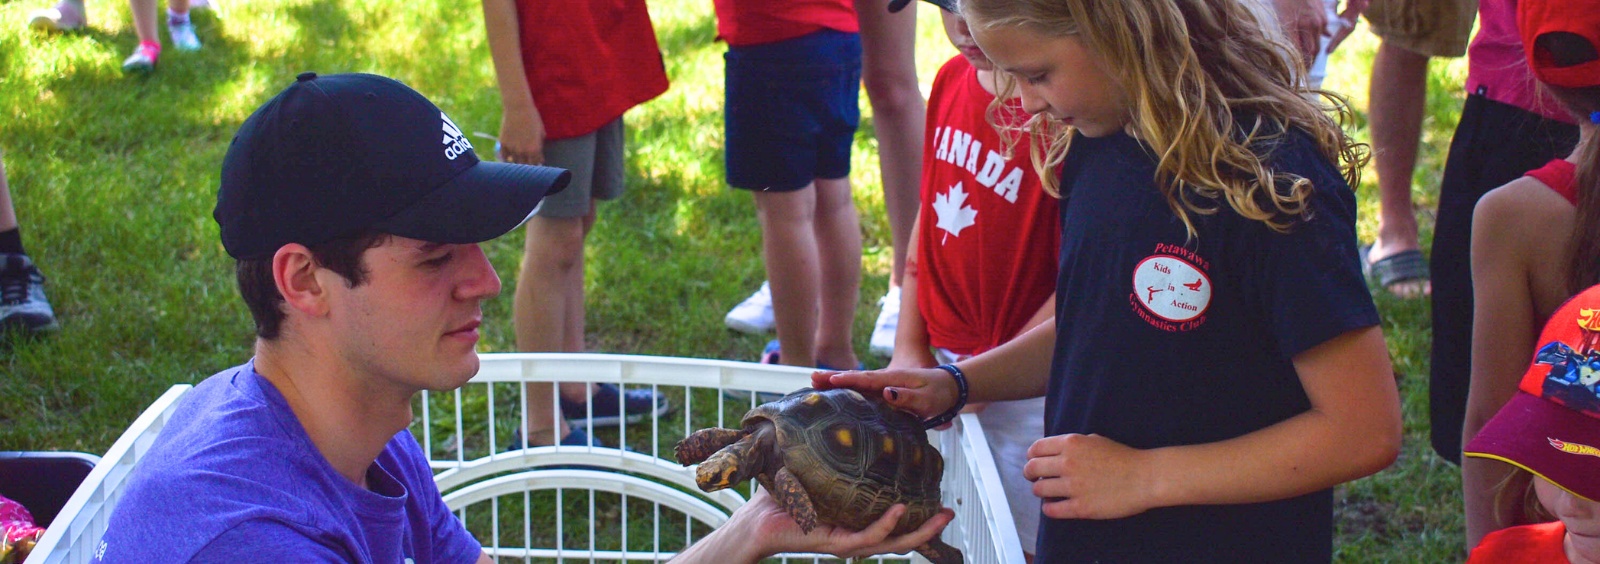 A young child petting a turtle at a petting zoo.